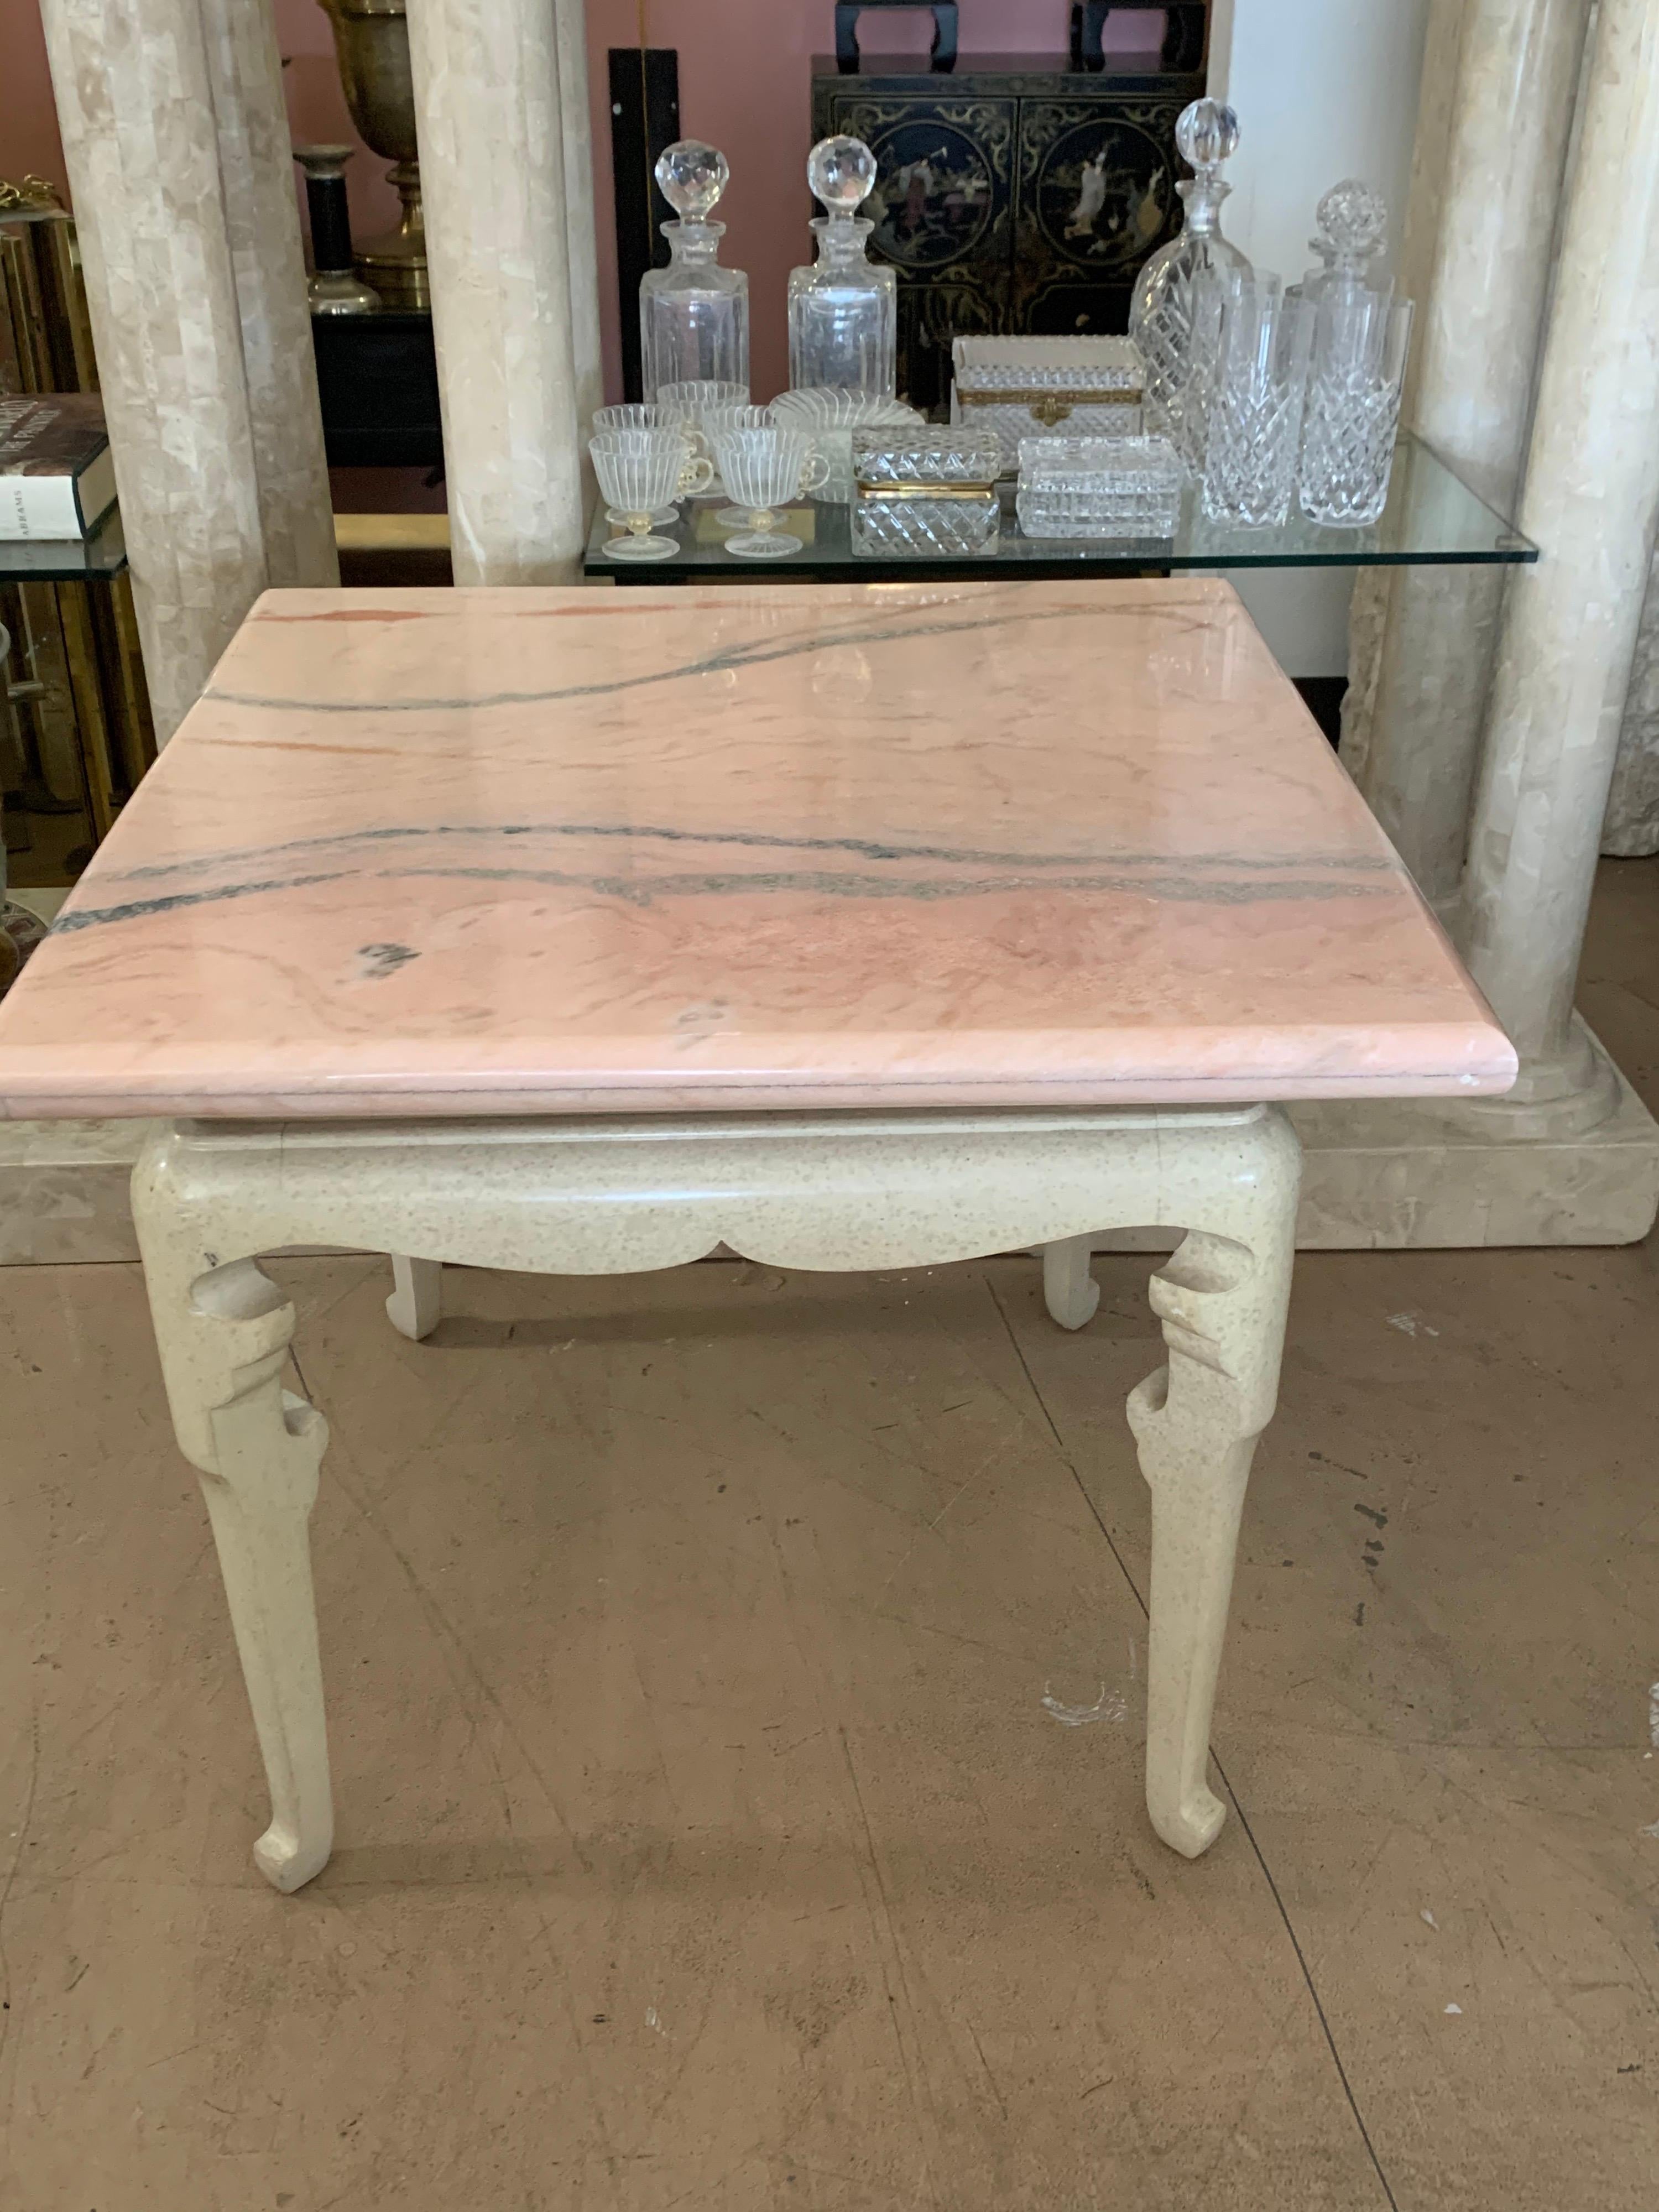 This piece came from the living room of a fashionista’s house in Palm Springs California. The table was made by Marge Carson with custom pink veined marble top added. The colorations are really beautiful. Two color beige base with pink and beige